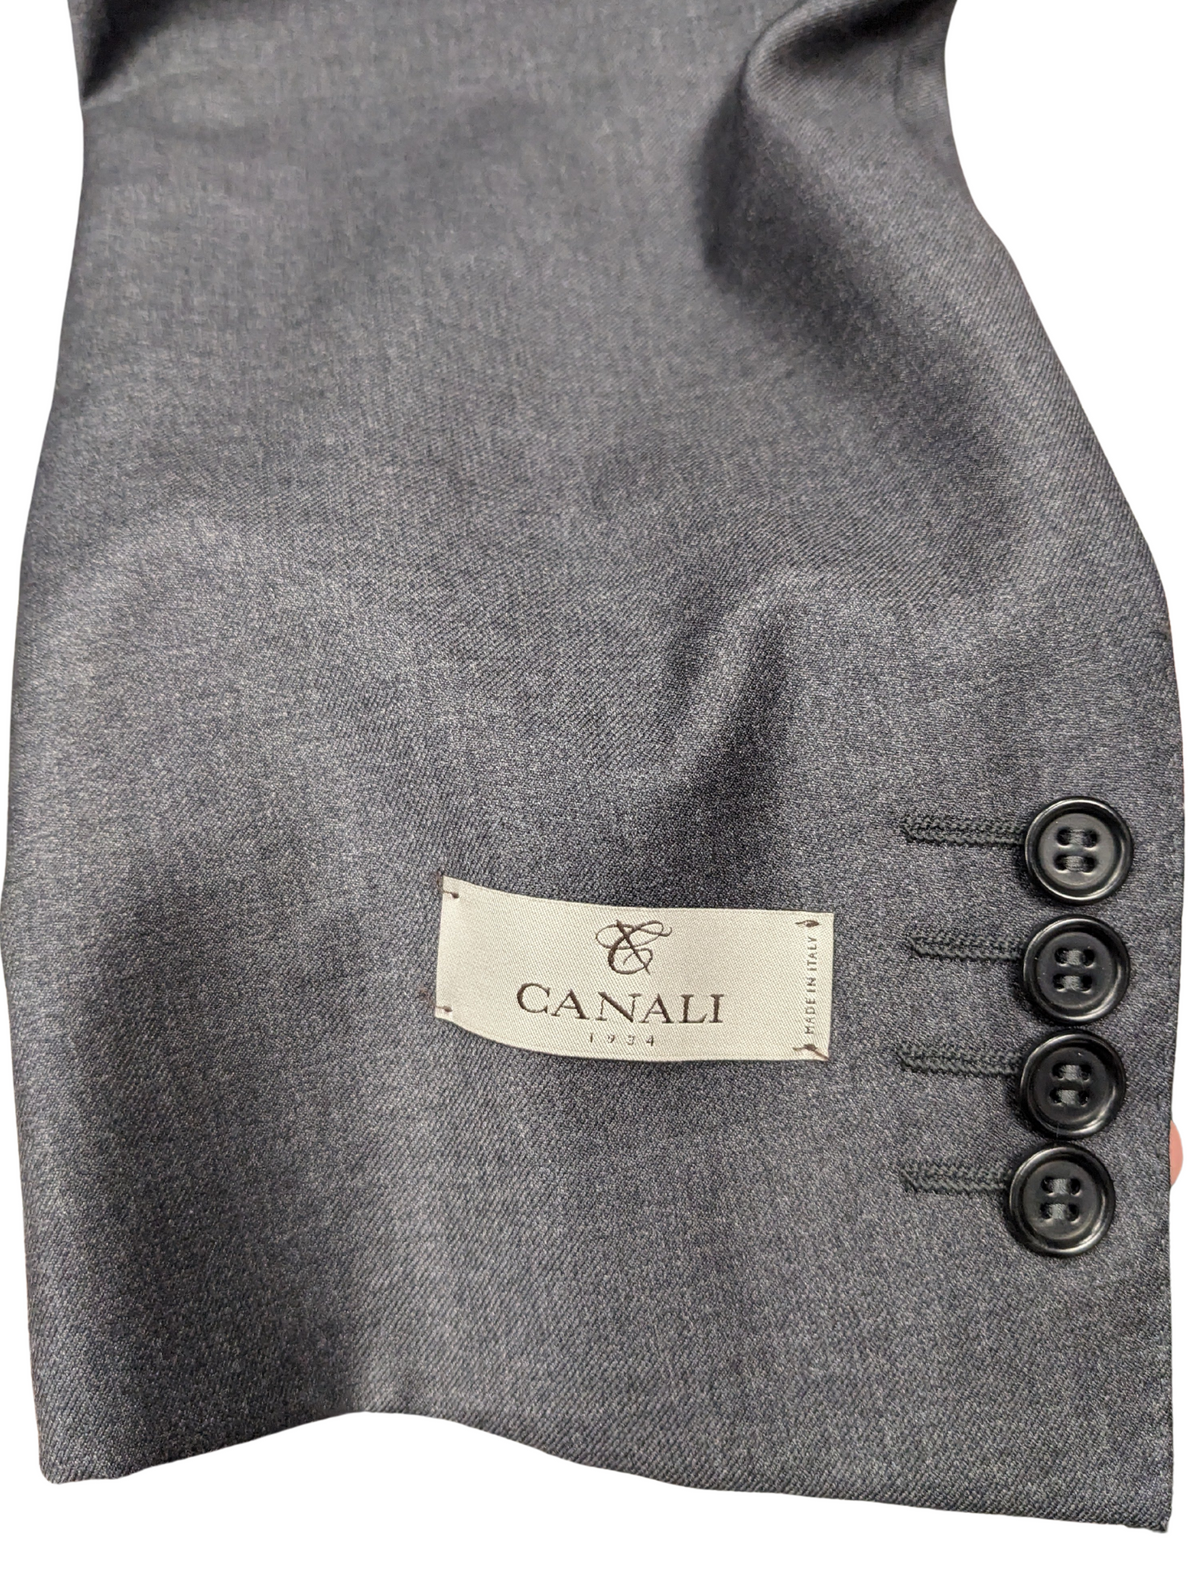 Canali 1934 Mens Solid Charcoal Gray 44L Drop 7 100% Wool 2 Piece Suit